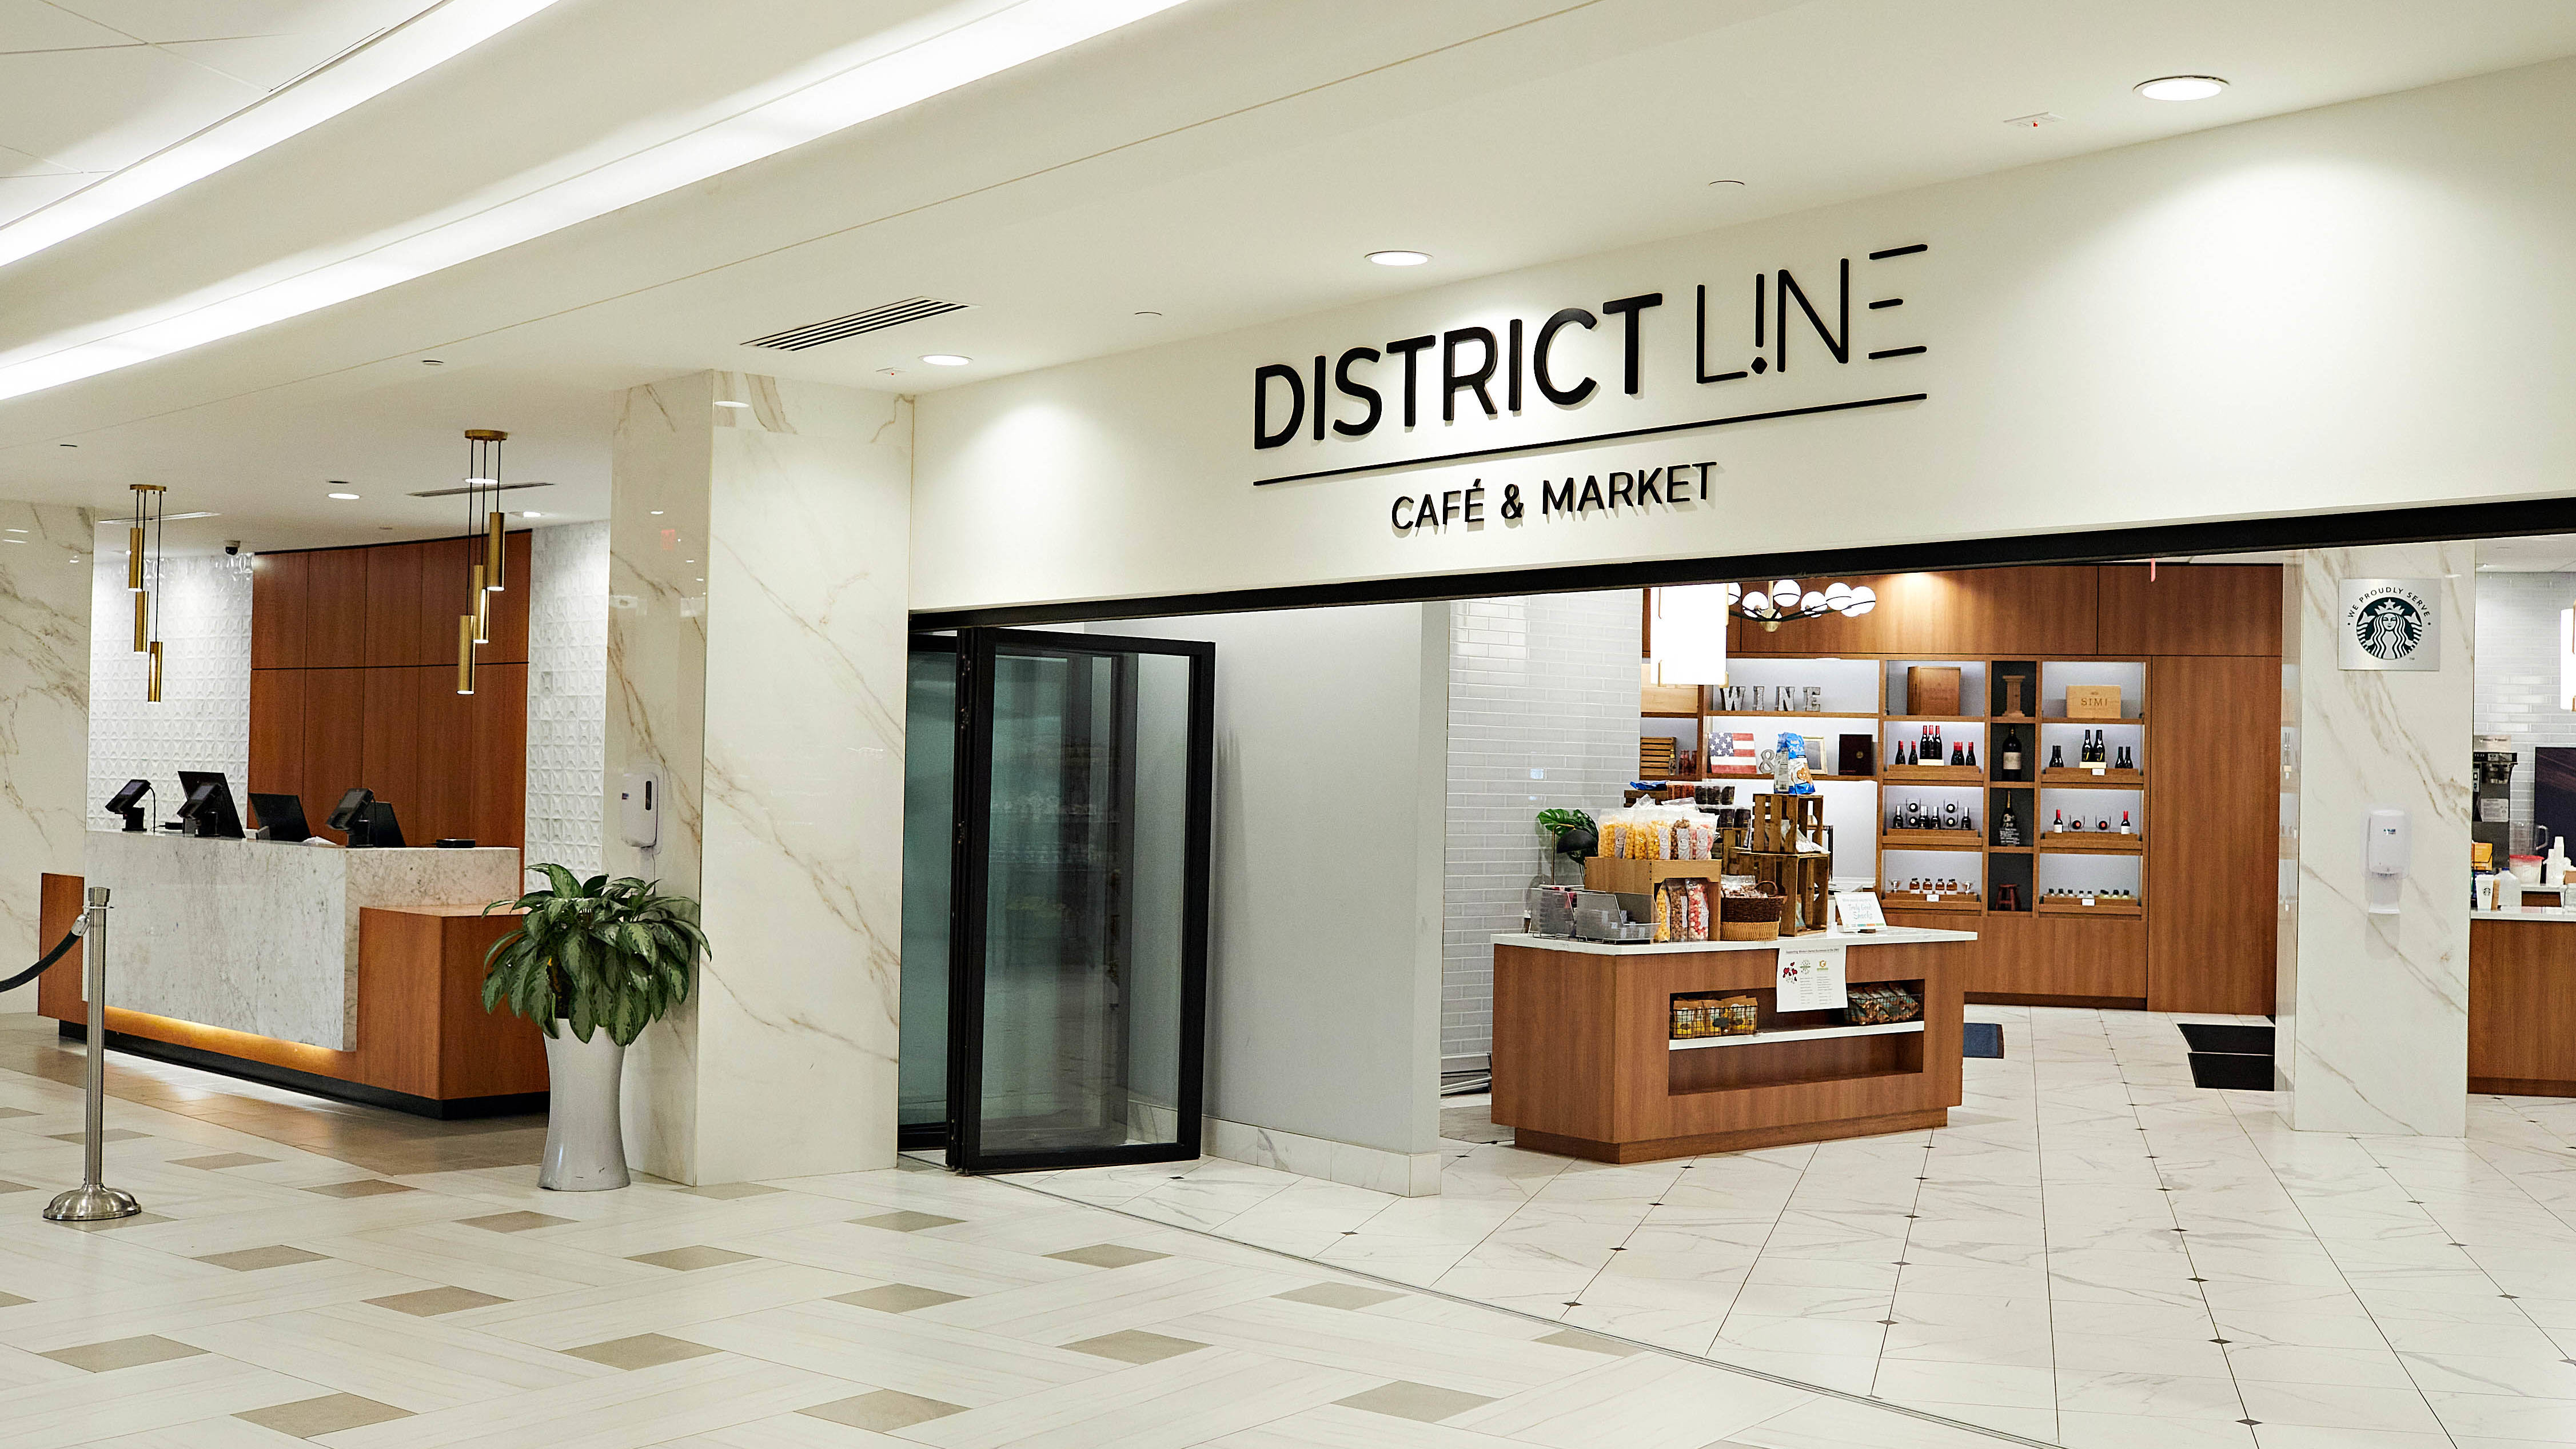 Exterior of the District Line Cafe & Market